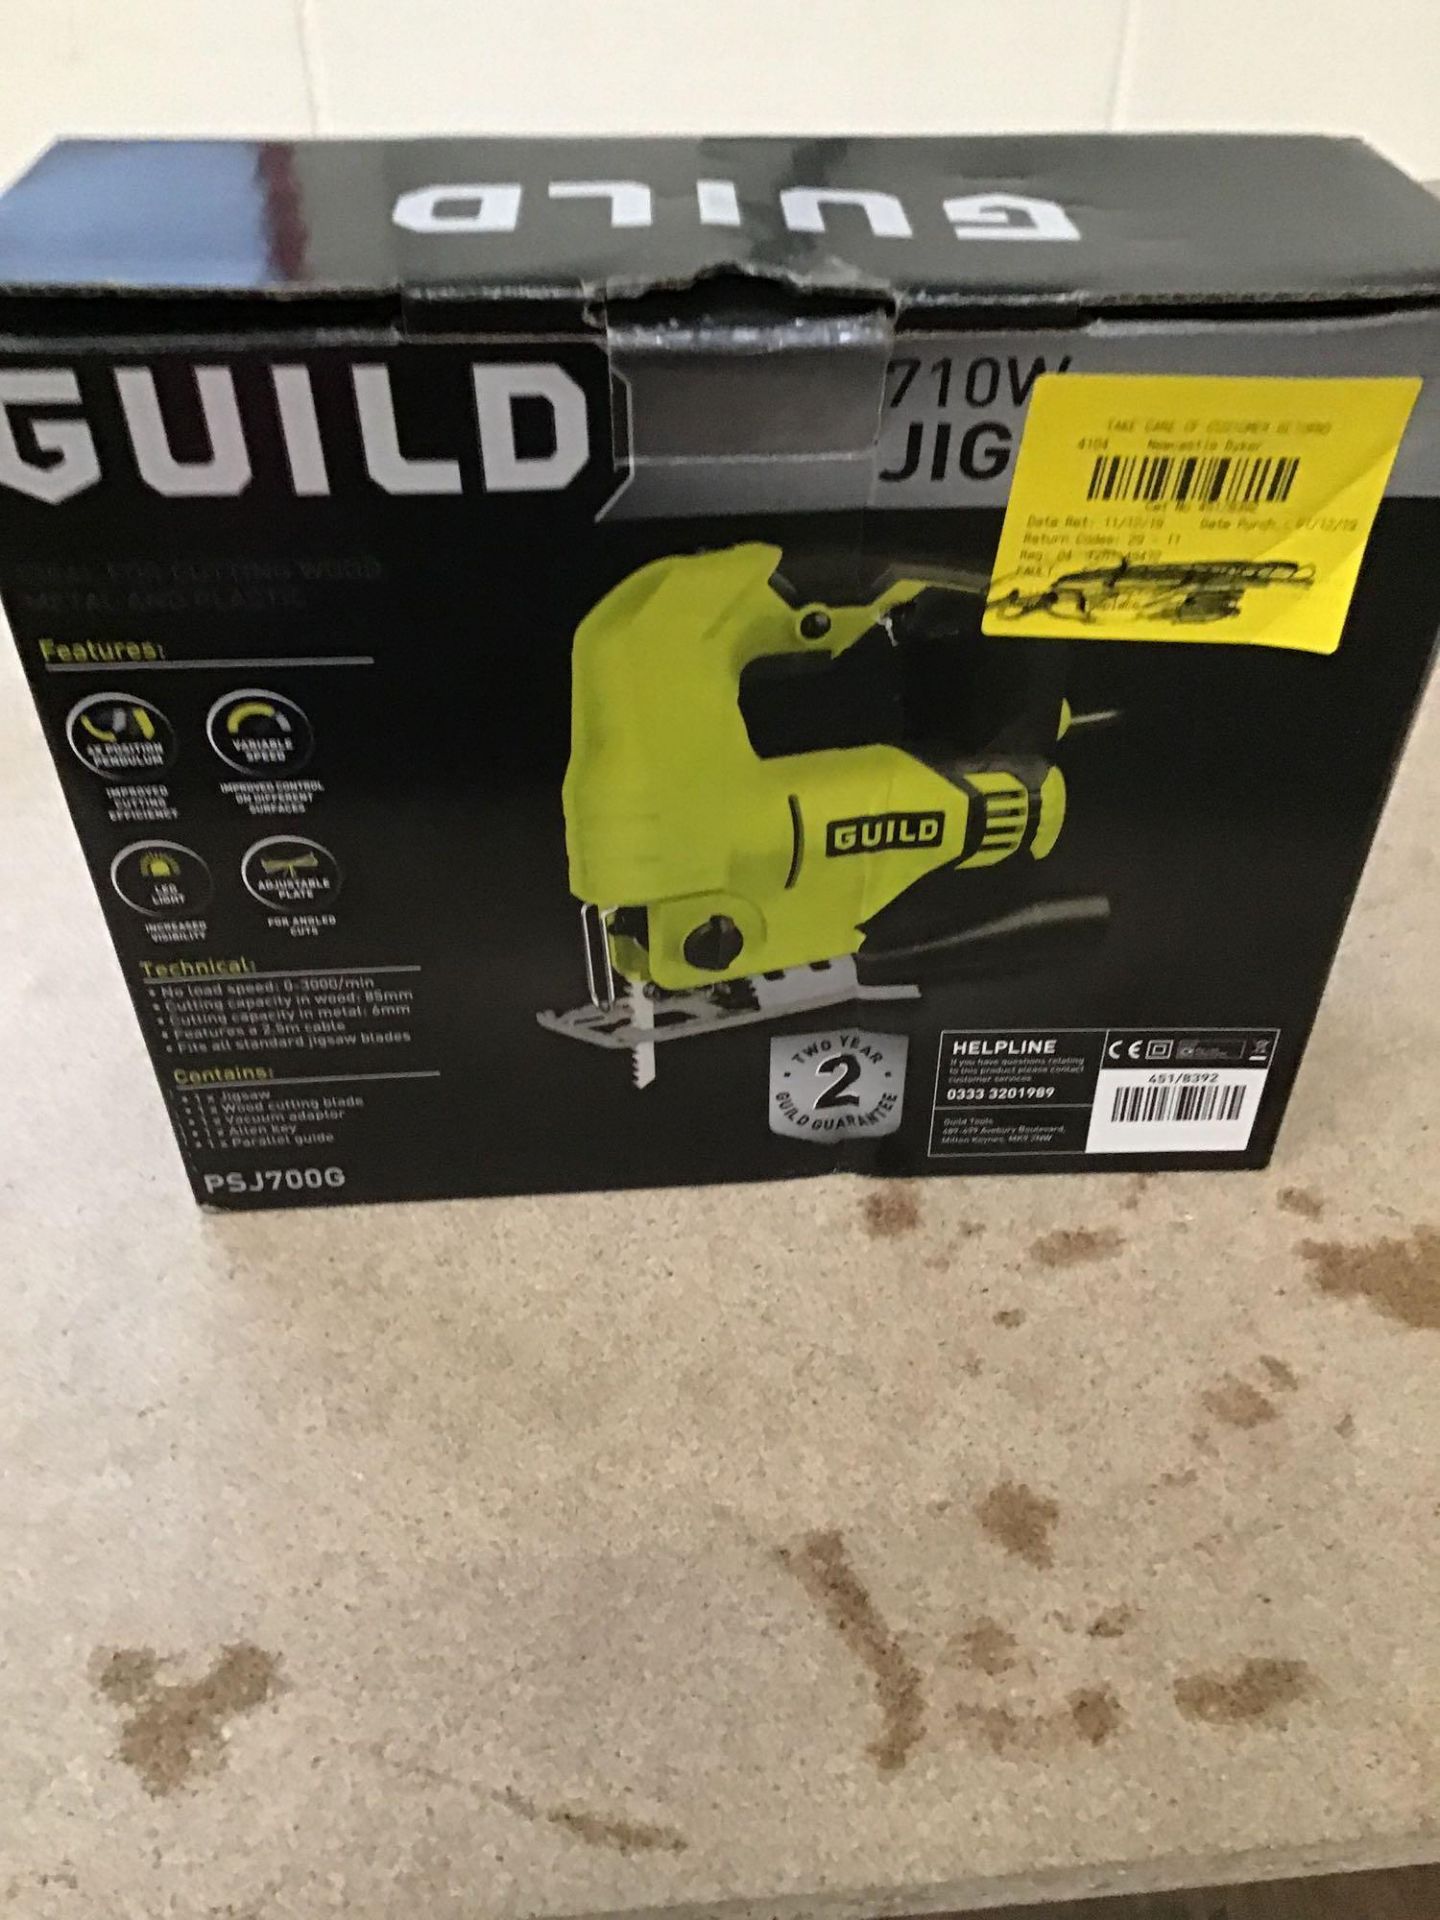 Guild Variable Speed Jigsaw - 710W, £30.00 RRP - Image 2 of 5